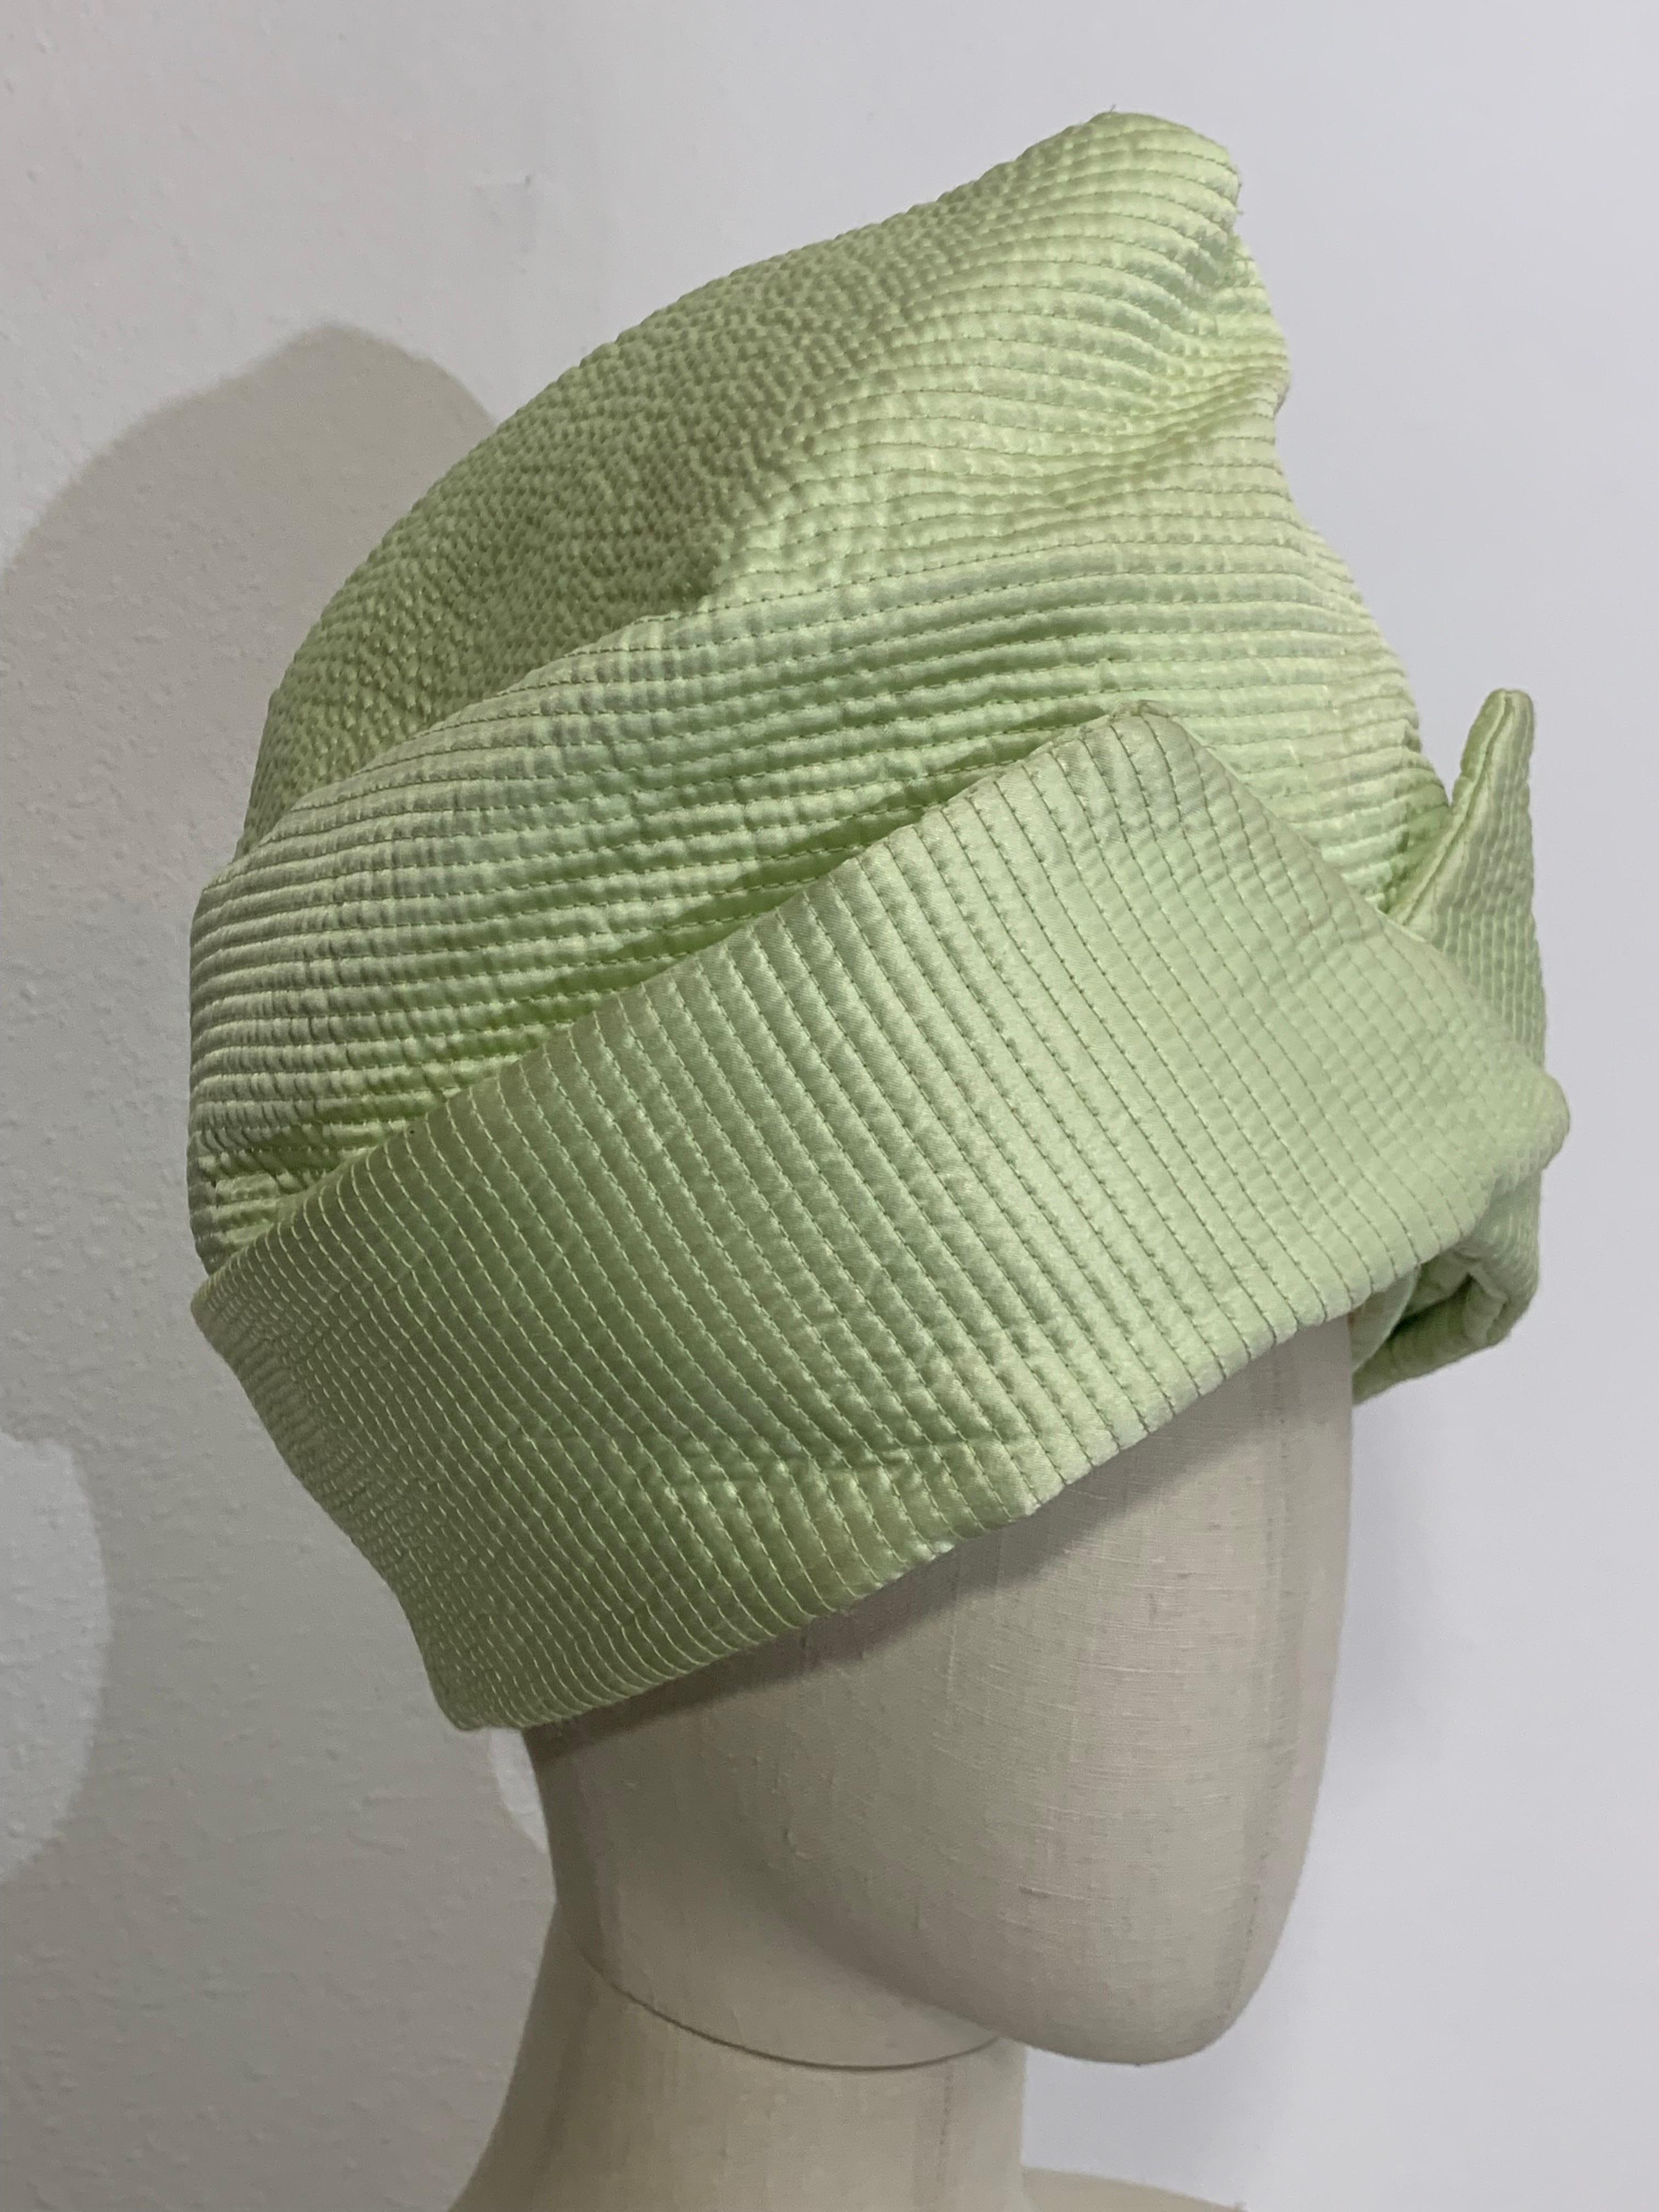 Custom Made Suzanne Couture Millinery NY Spring/Summer Celadon Quilted Silk Toque / Turban:  Folded, slightly padded, peaked at top. Organza lining. US size 7 1/8. 

Please visit our 1Dibs Store for many more options from this same collection which